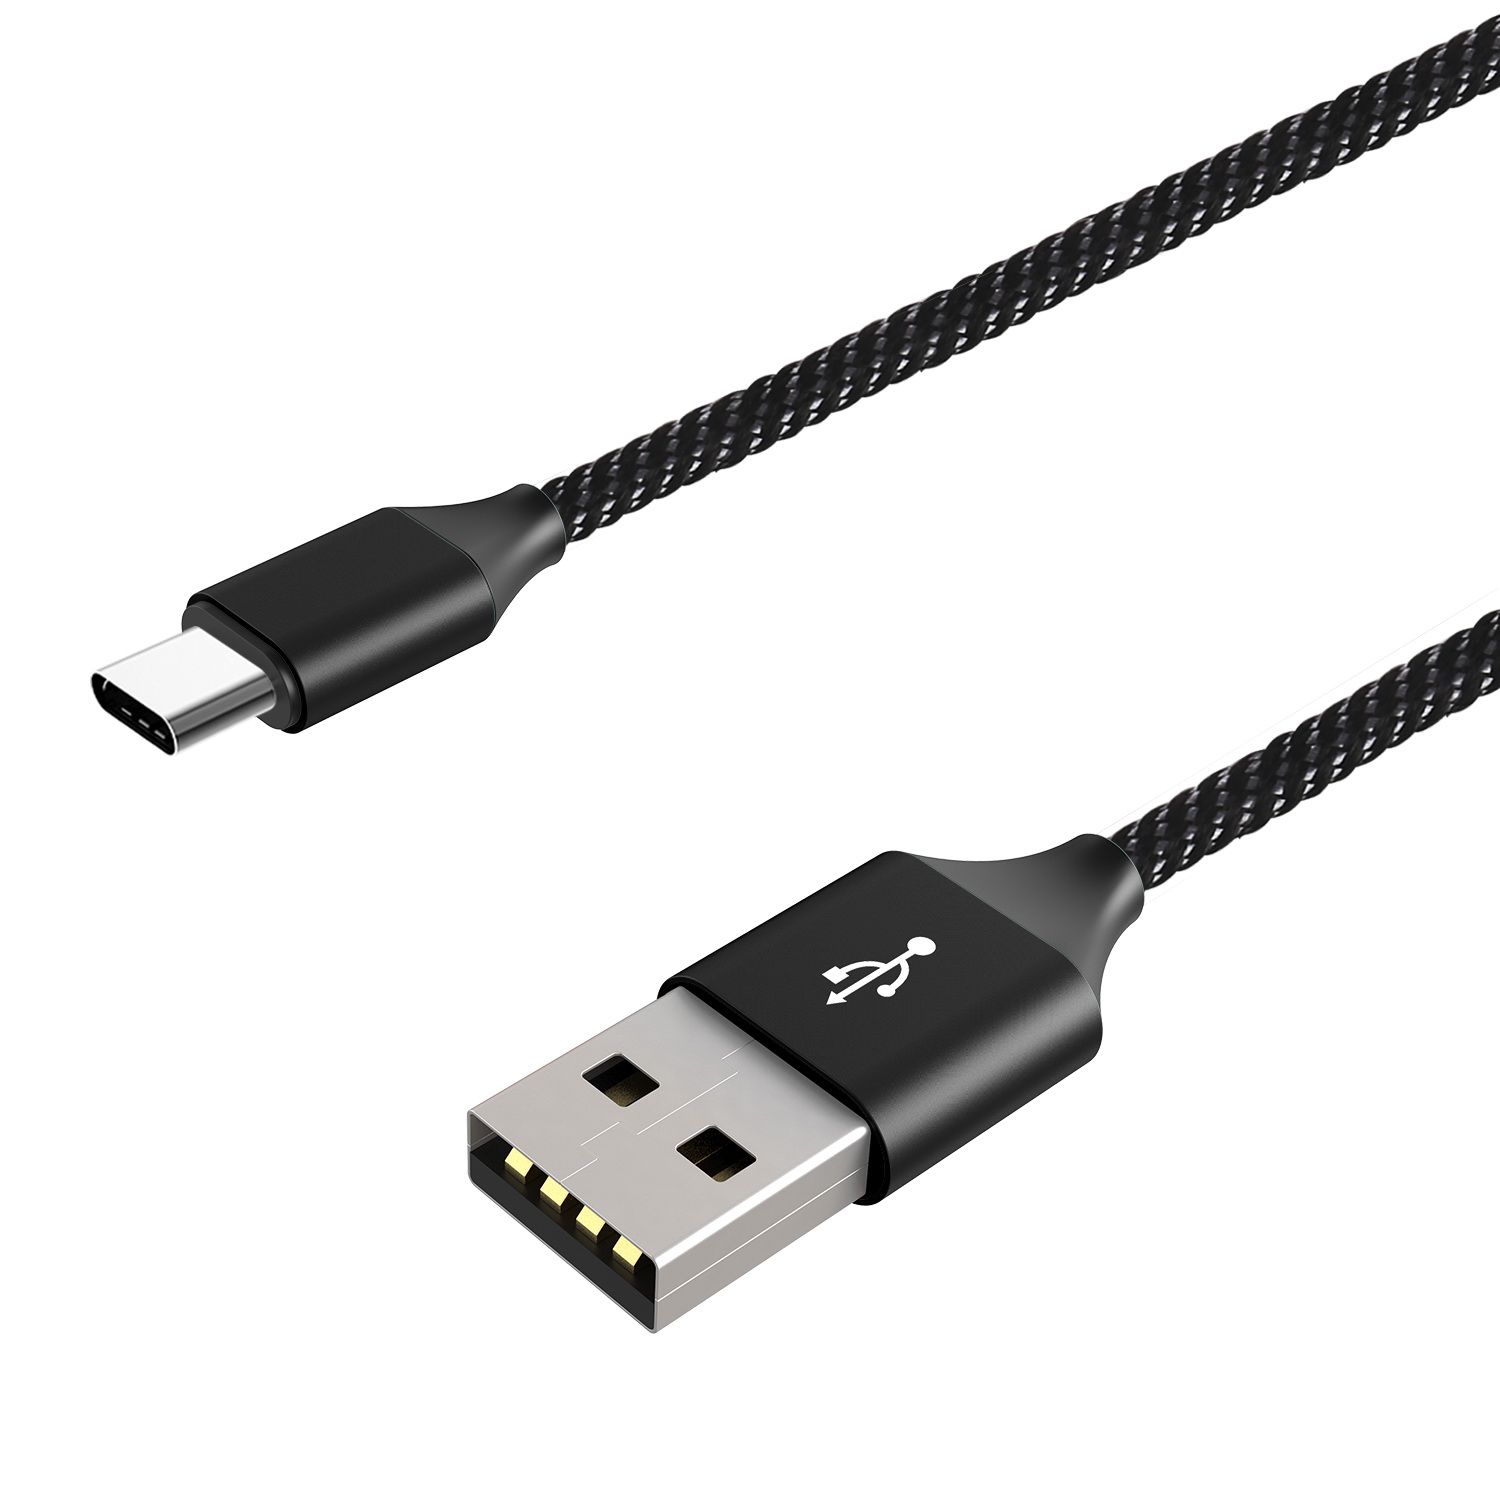 Bemz USB Cable Compatible with LG K51, Heavy Duty Nylon Braided USB Type-C (USB-C to USB-A) Cable and Atom Wipe - 6.5 Feet (2 Meters) - Black - image 1 of 6